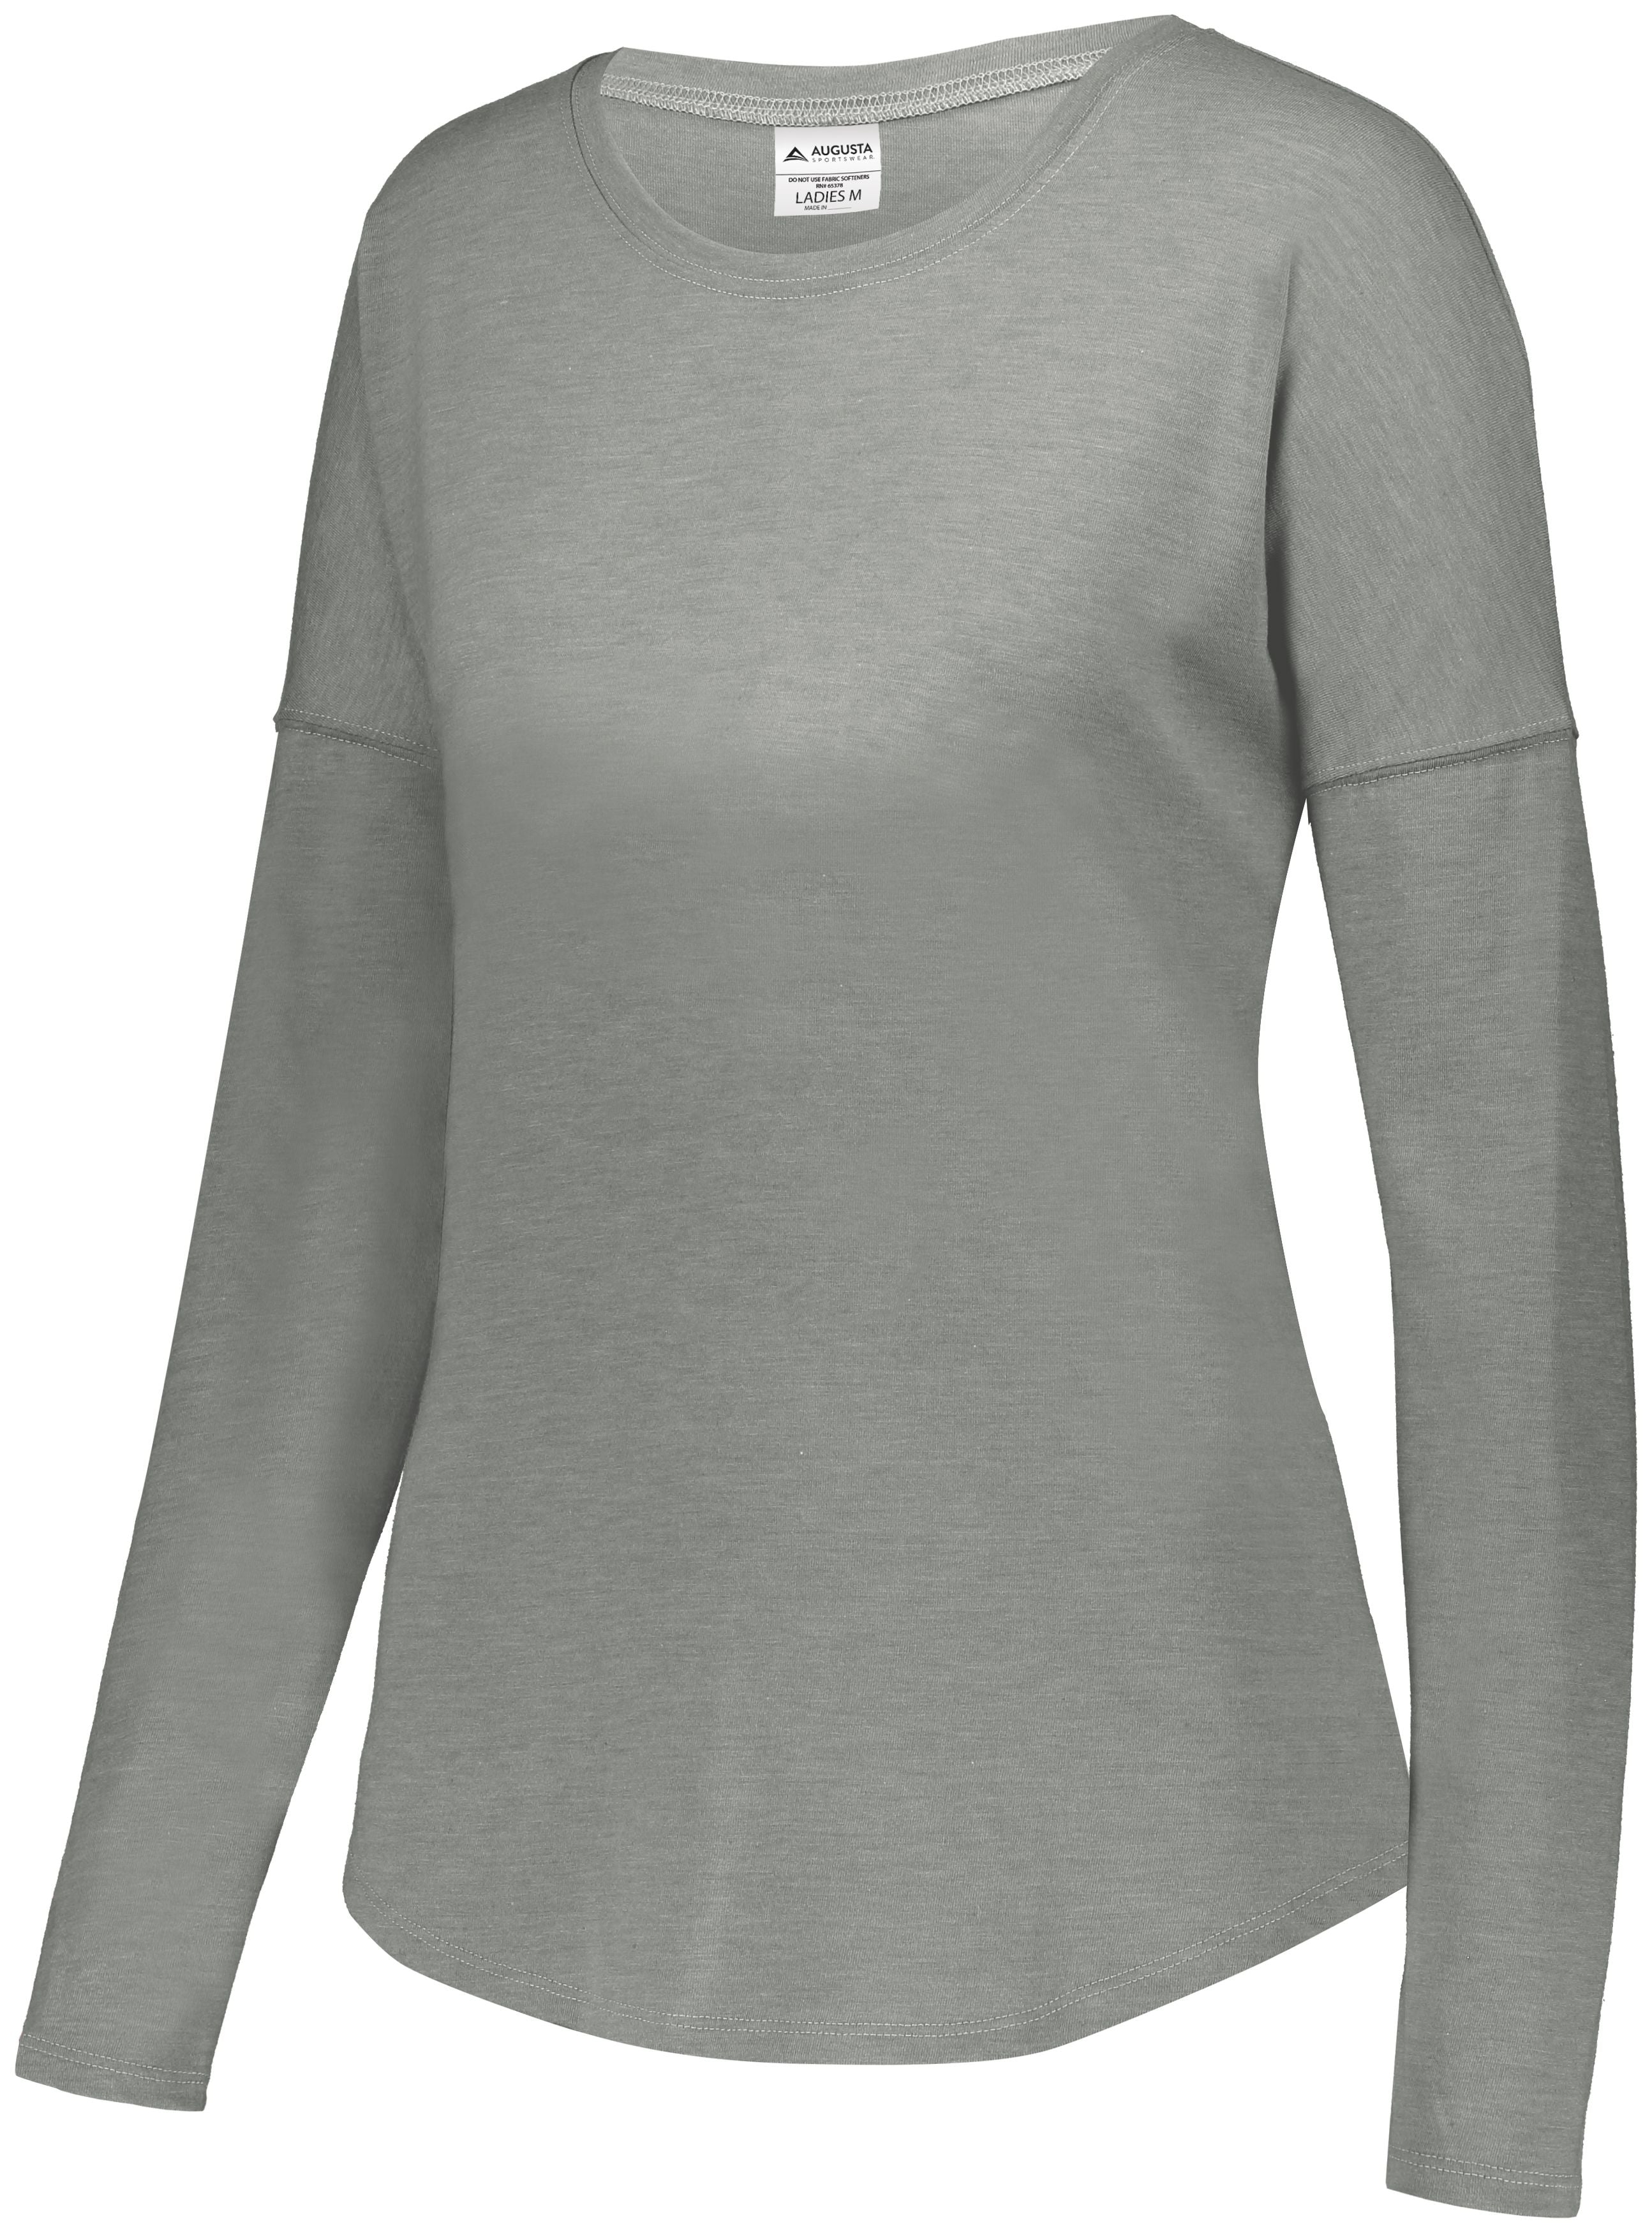 Augusta Sportswear Ladies Lux Tri-Blend Long Sleeve Shirt in Grey Heather  -Part of the Ladies, Augusta-Products, Shirts product lines at KanaleyCreations.com